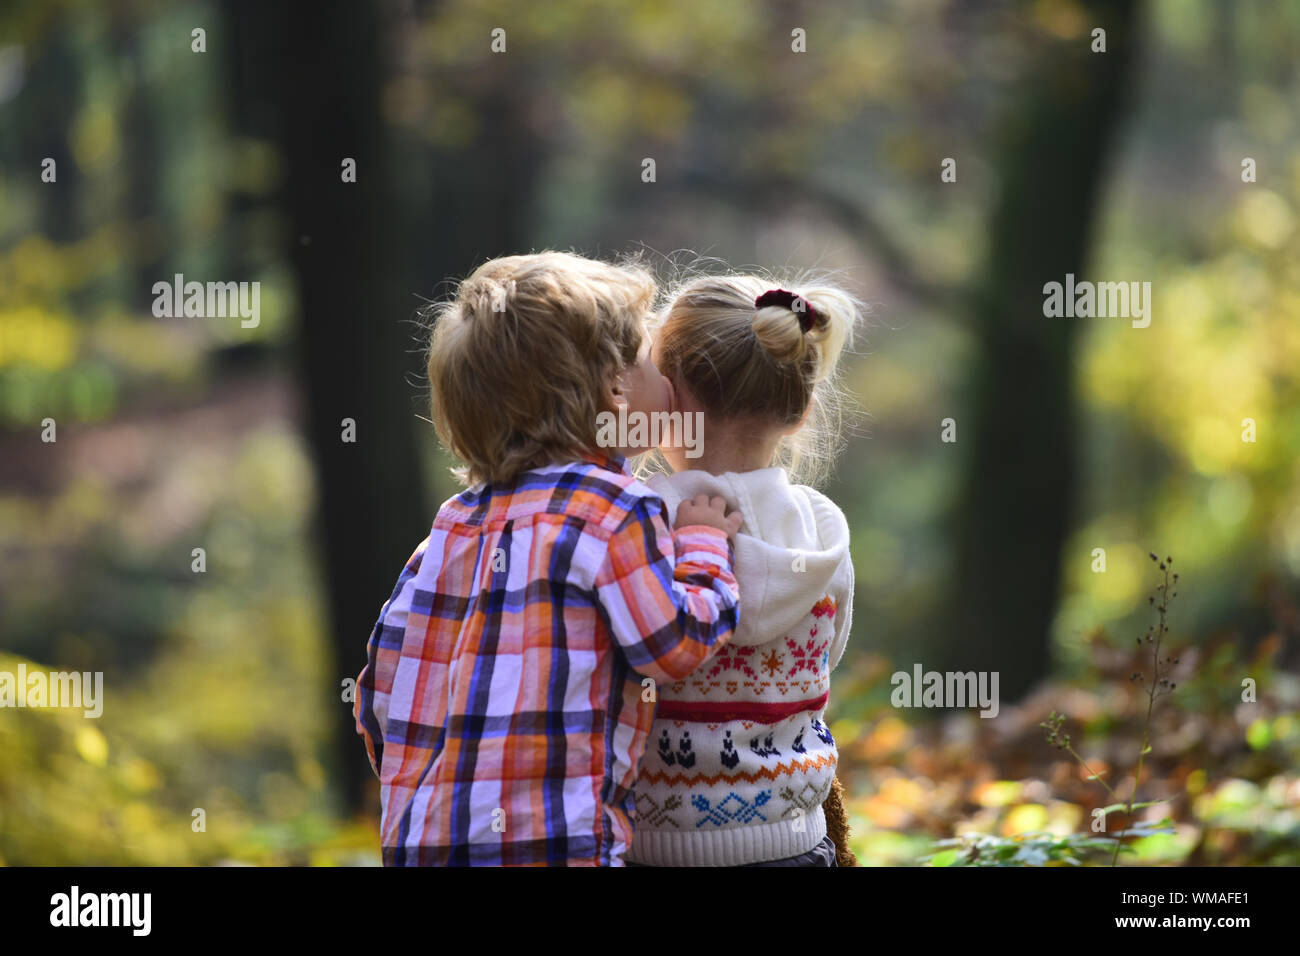 Childhood kiss, love and trust. Childhood friendship and children early development Stock Photo